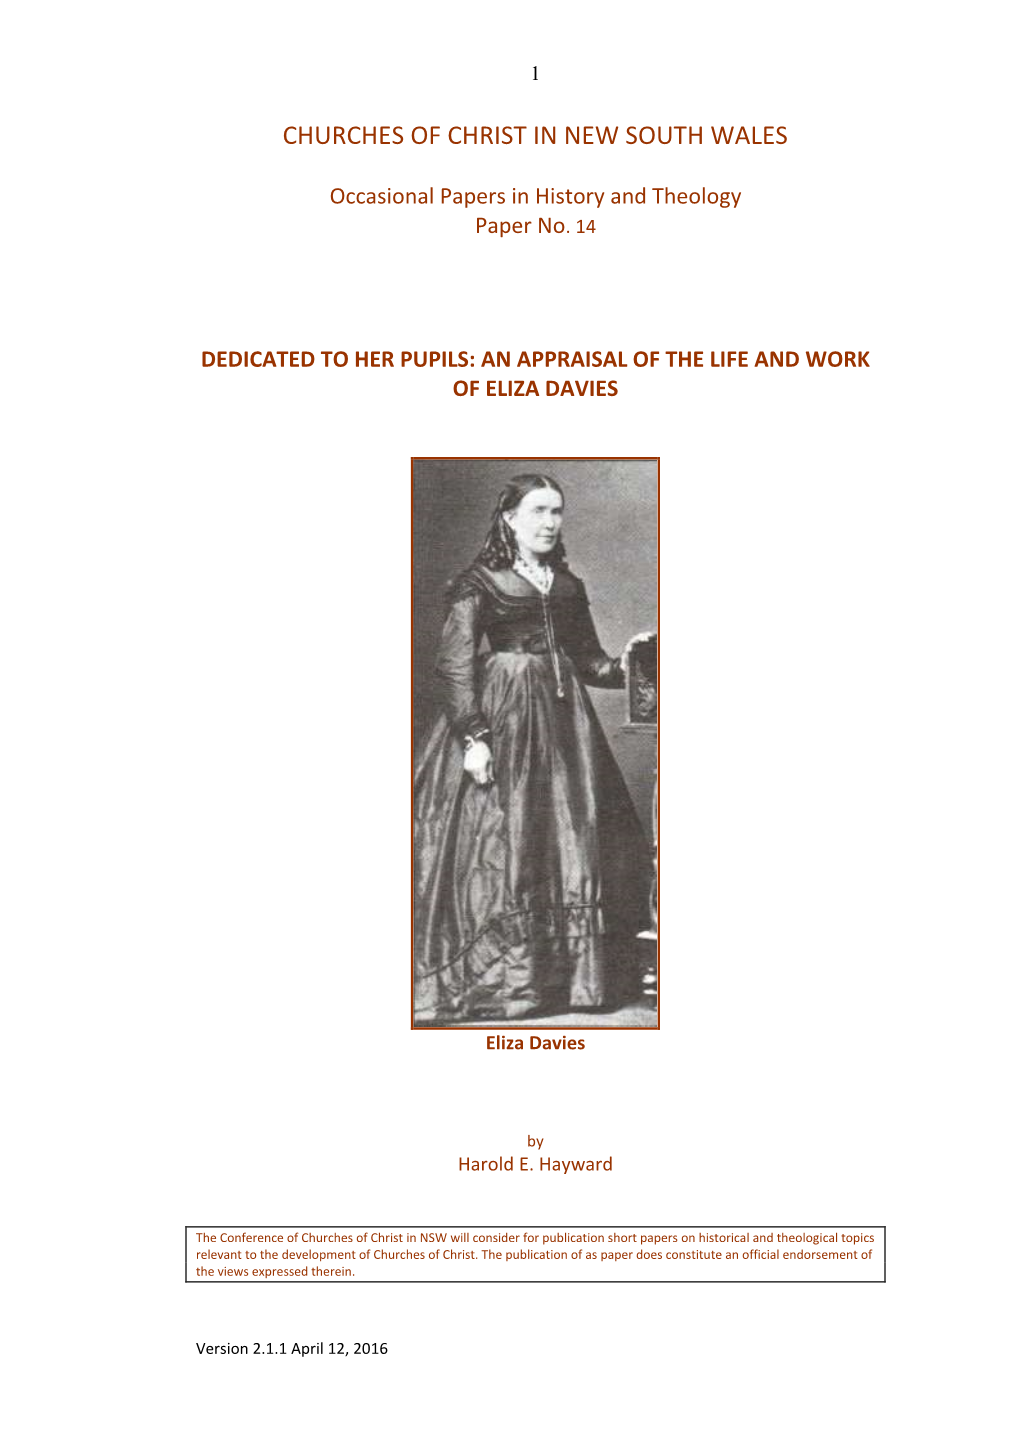 Dedicated to Her Pupils-An Appraisal of the Life and Work Of